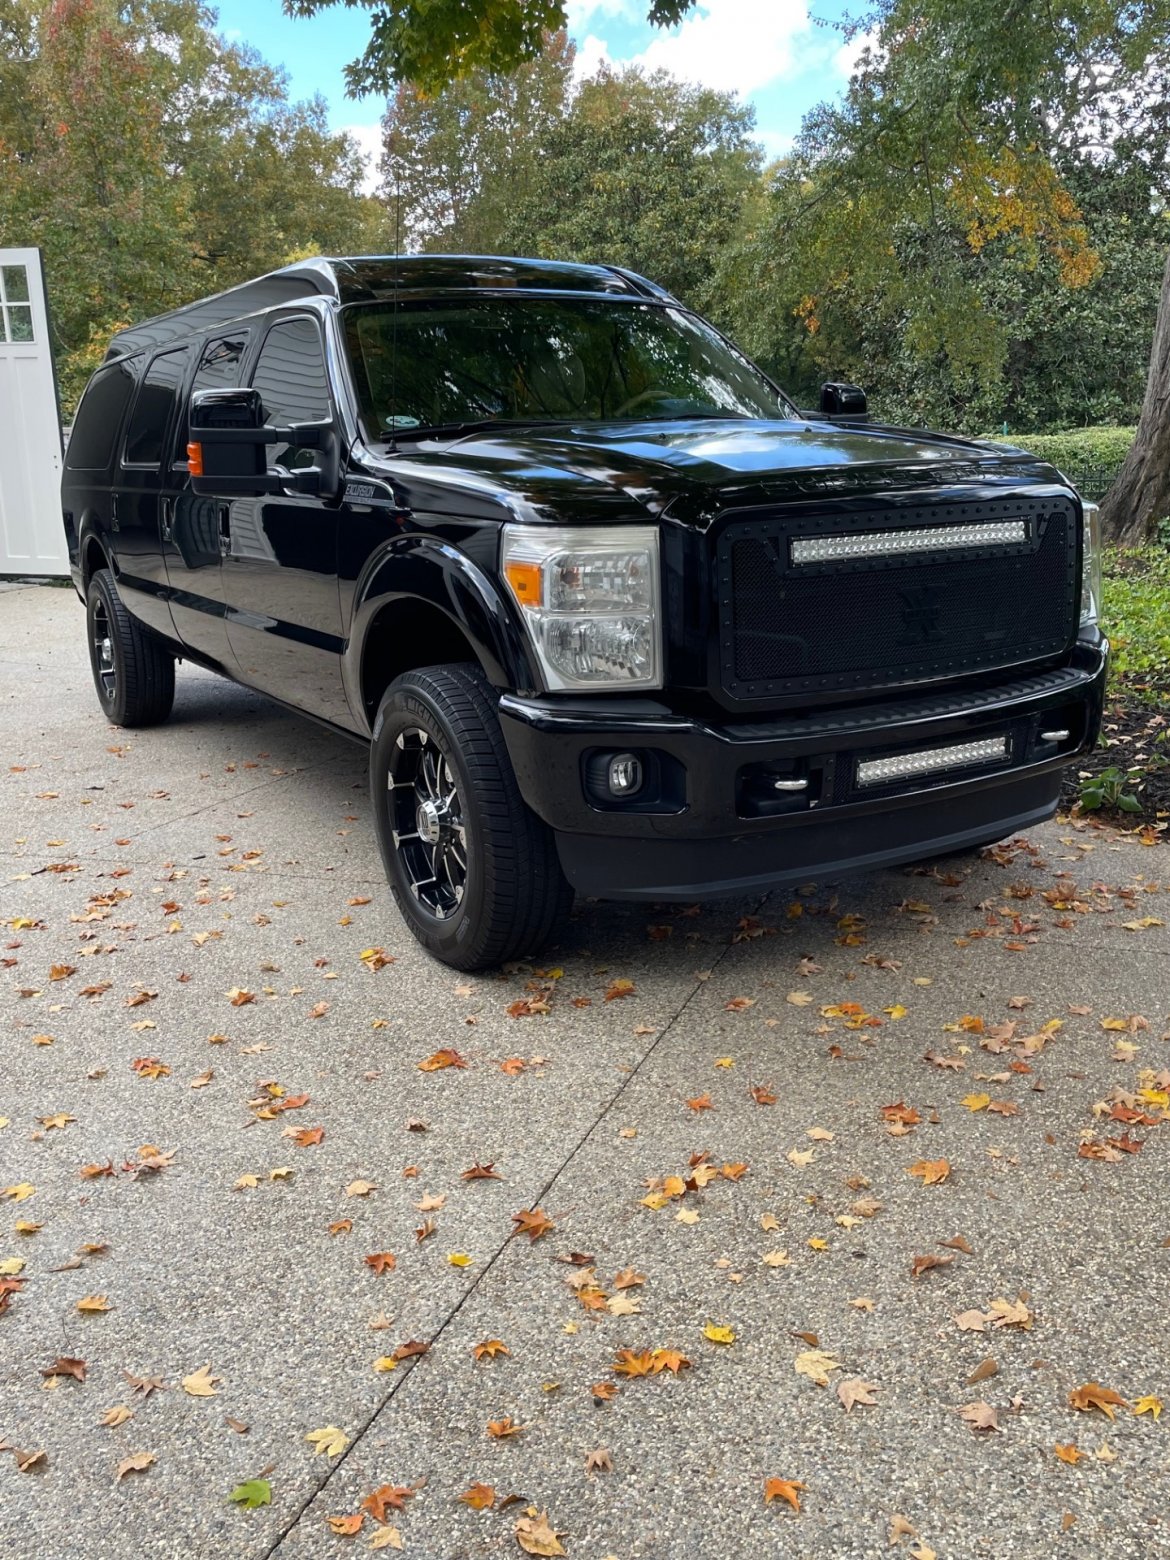 CEO SUV Mobile Office for sale: 2012 Ford F350 6.7L Diesel by US Limo LLC/Custom Autos by Tim